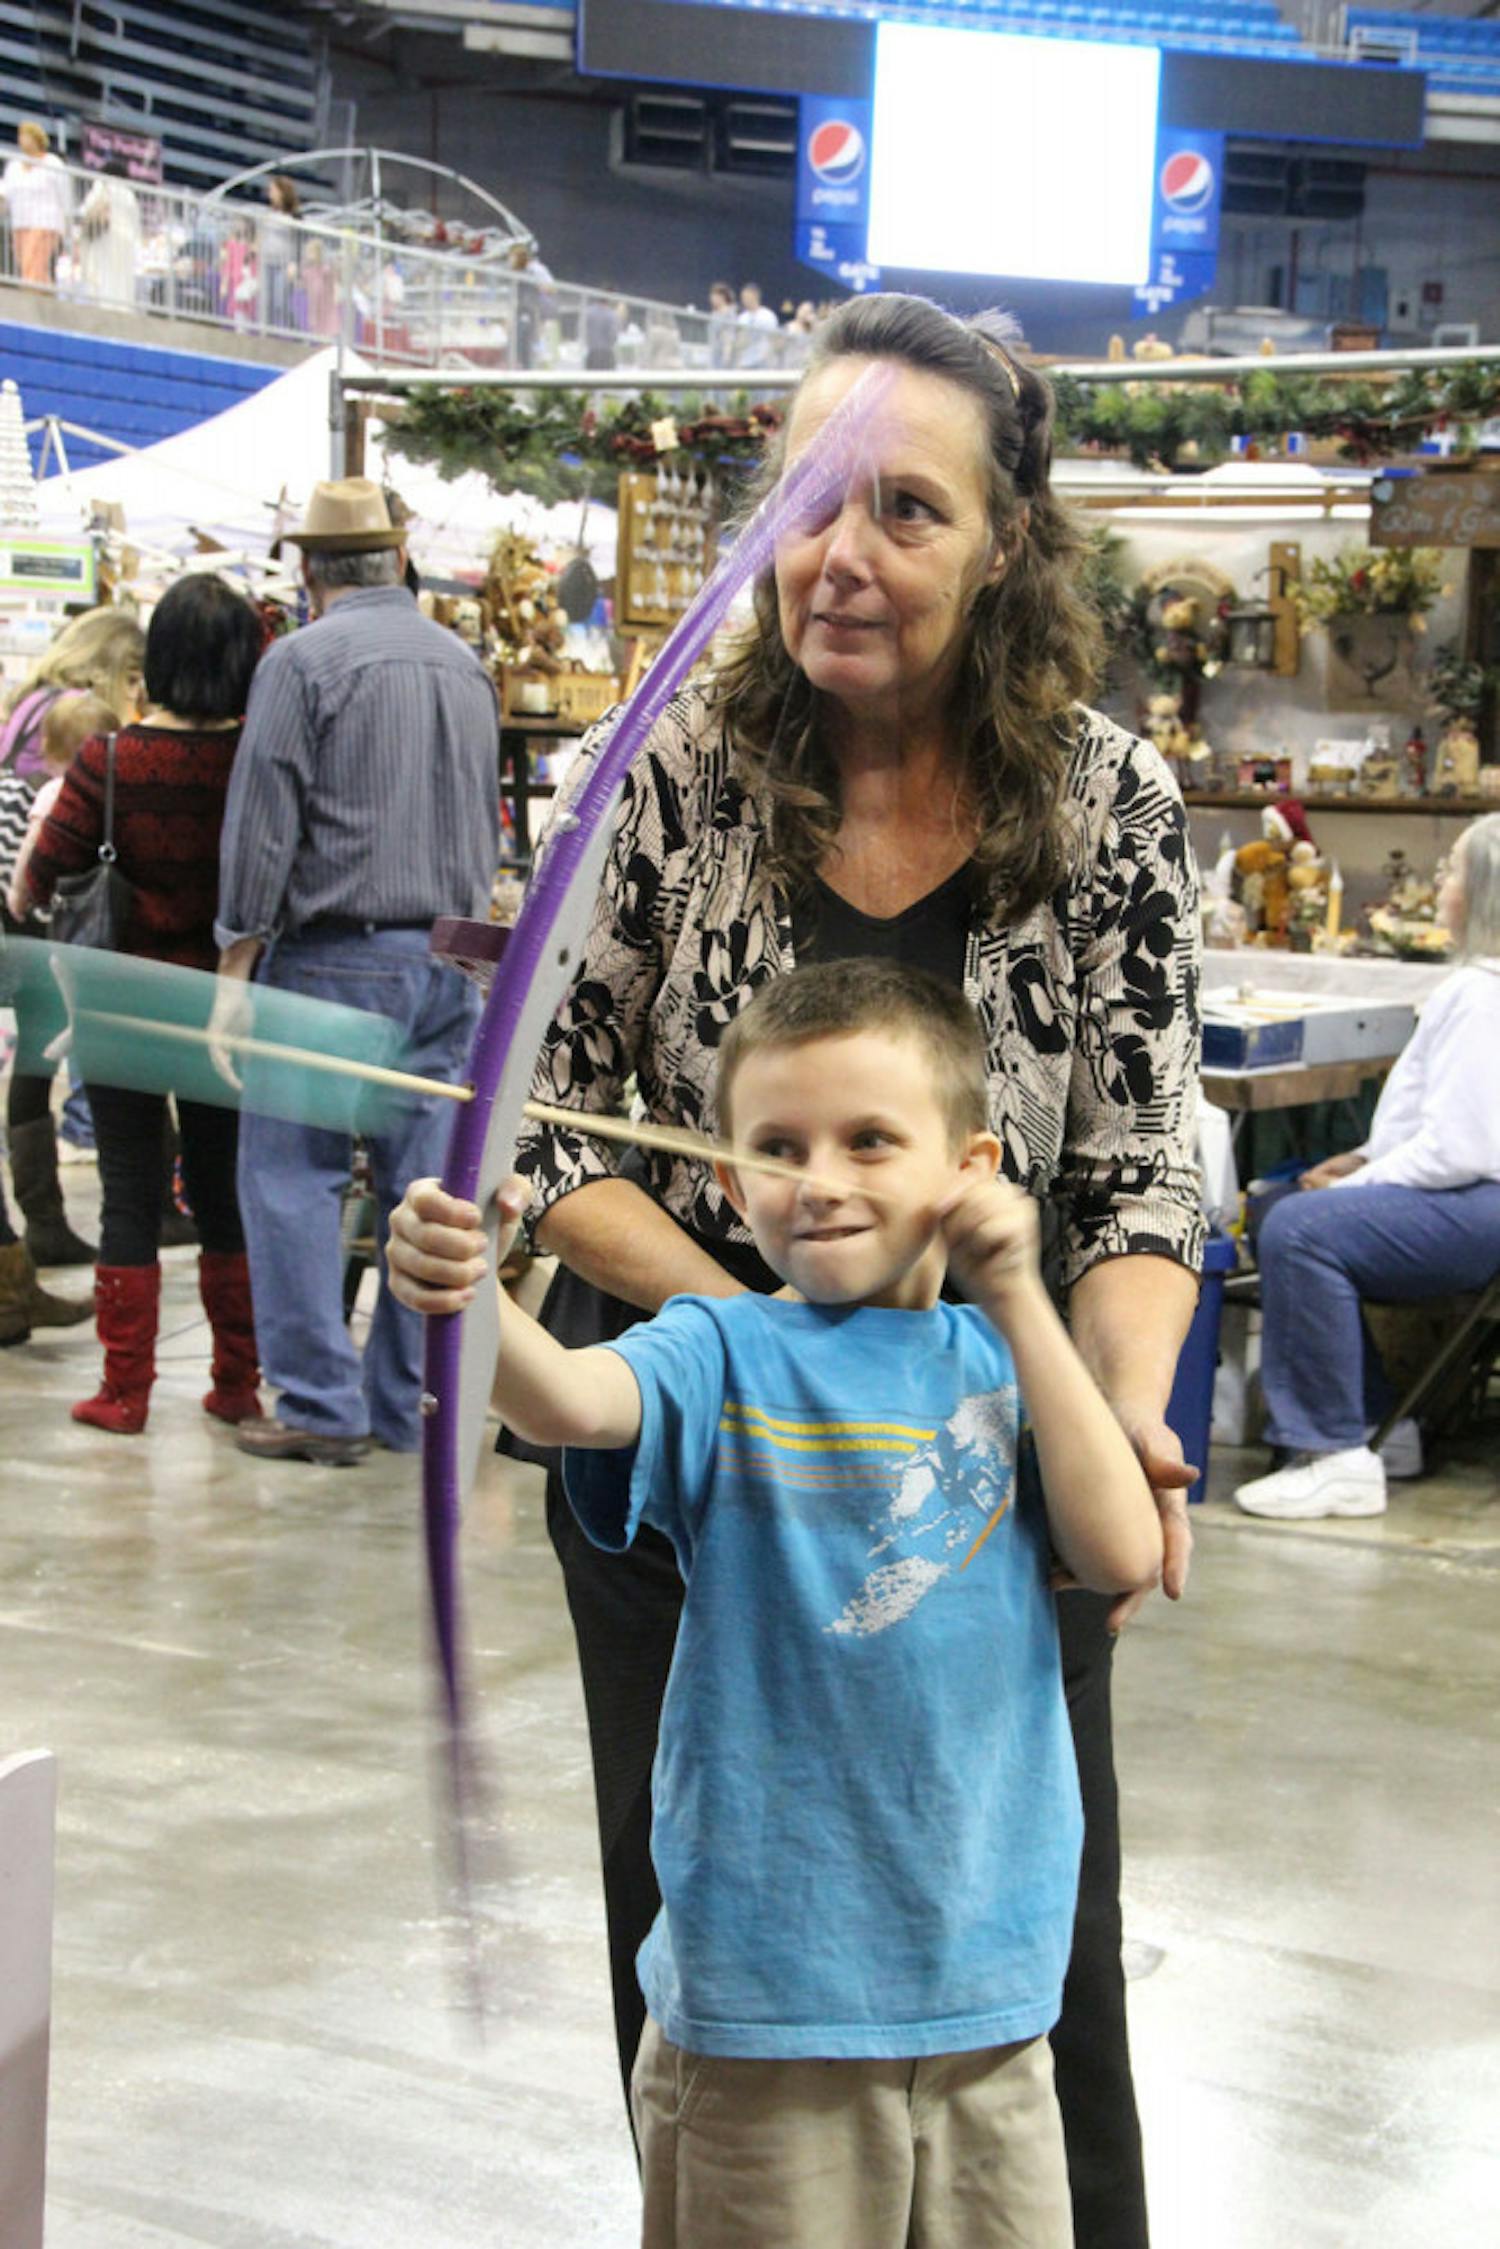 Jeanetta Scott, 58, shows Cayce Bowen, 8, how to shoot a bow and arrow at the 2015 Craft Festival. Scott is the owner of Jeanetta's Creative Designs alongside her husband, John Scott.